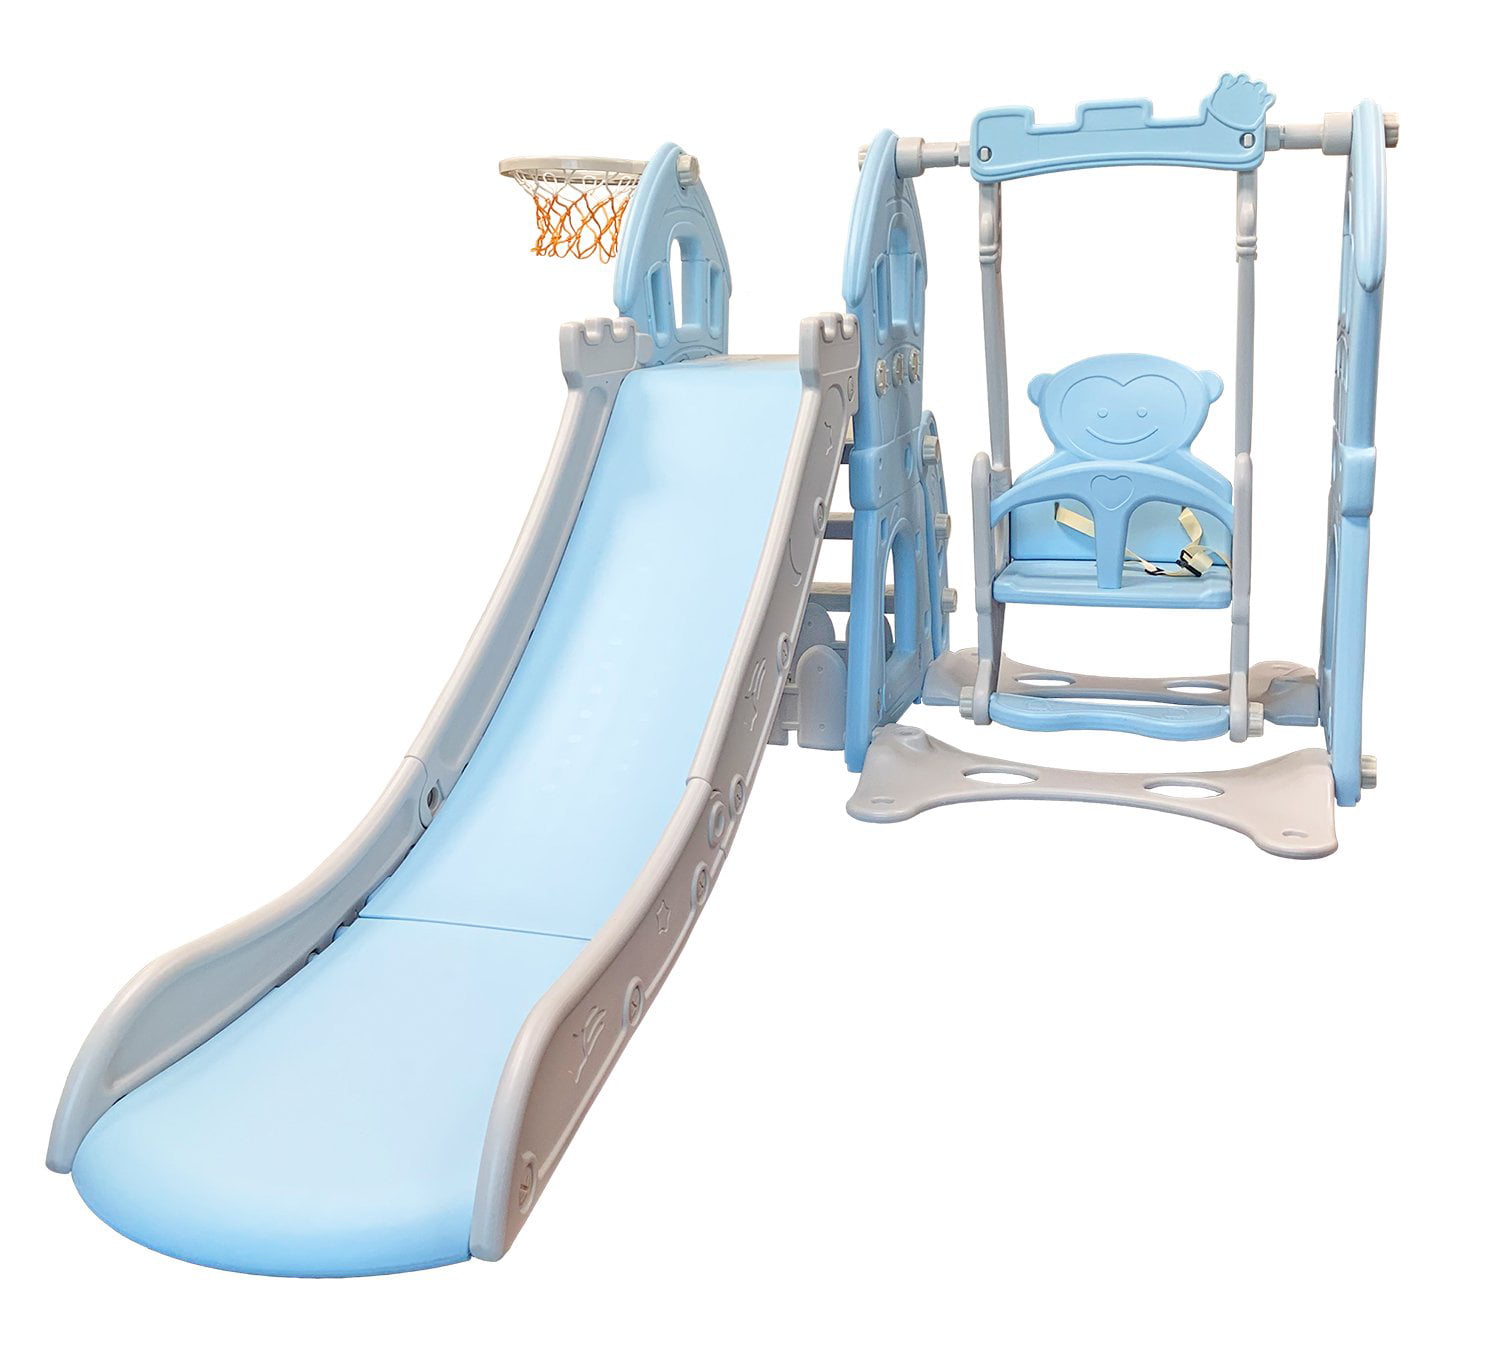 CycloneSound Climber and Slide Swing Set for Kids, 3 in 1 Climber 